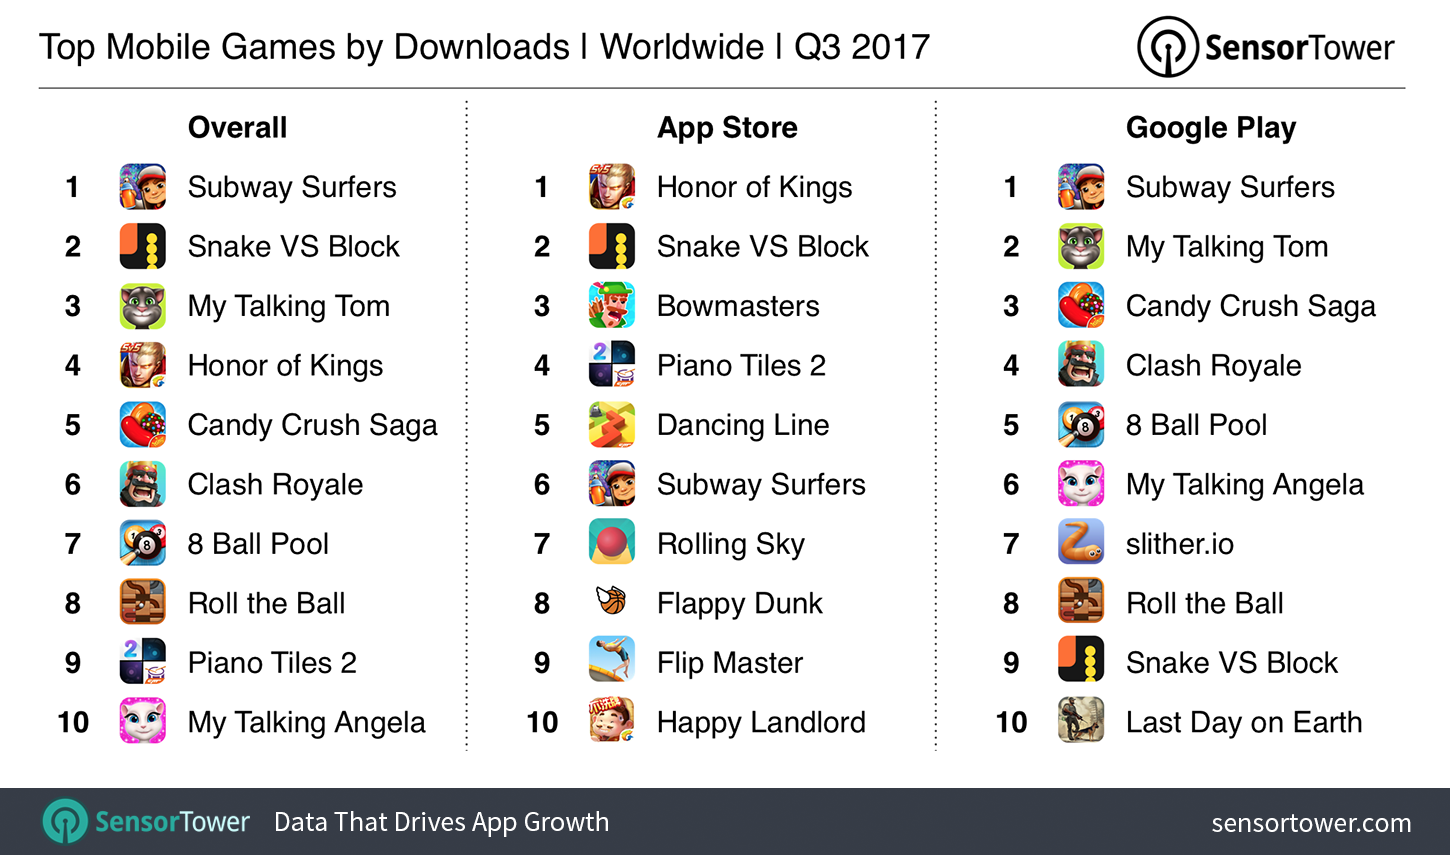 Q3 2017's Top Mobile Games by Downloads